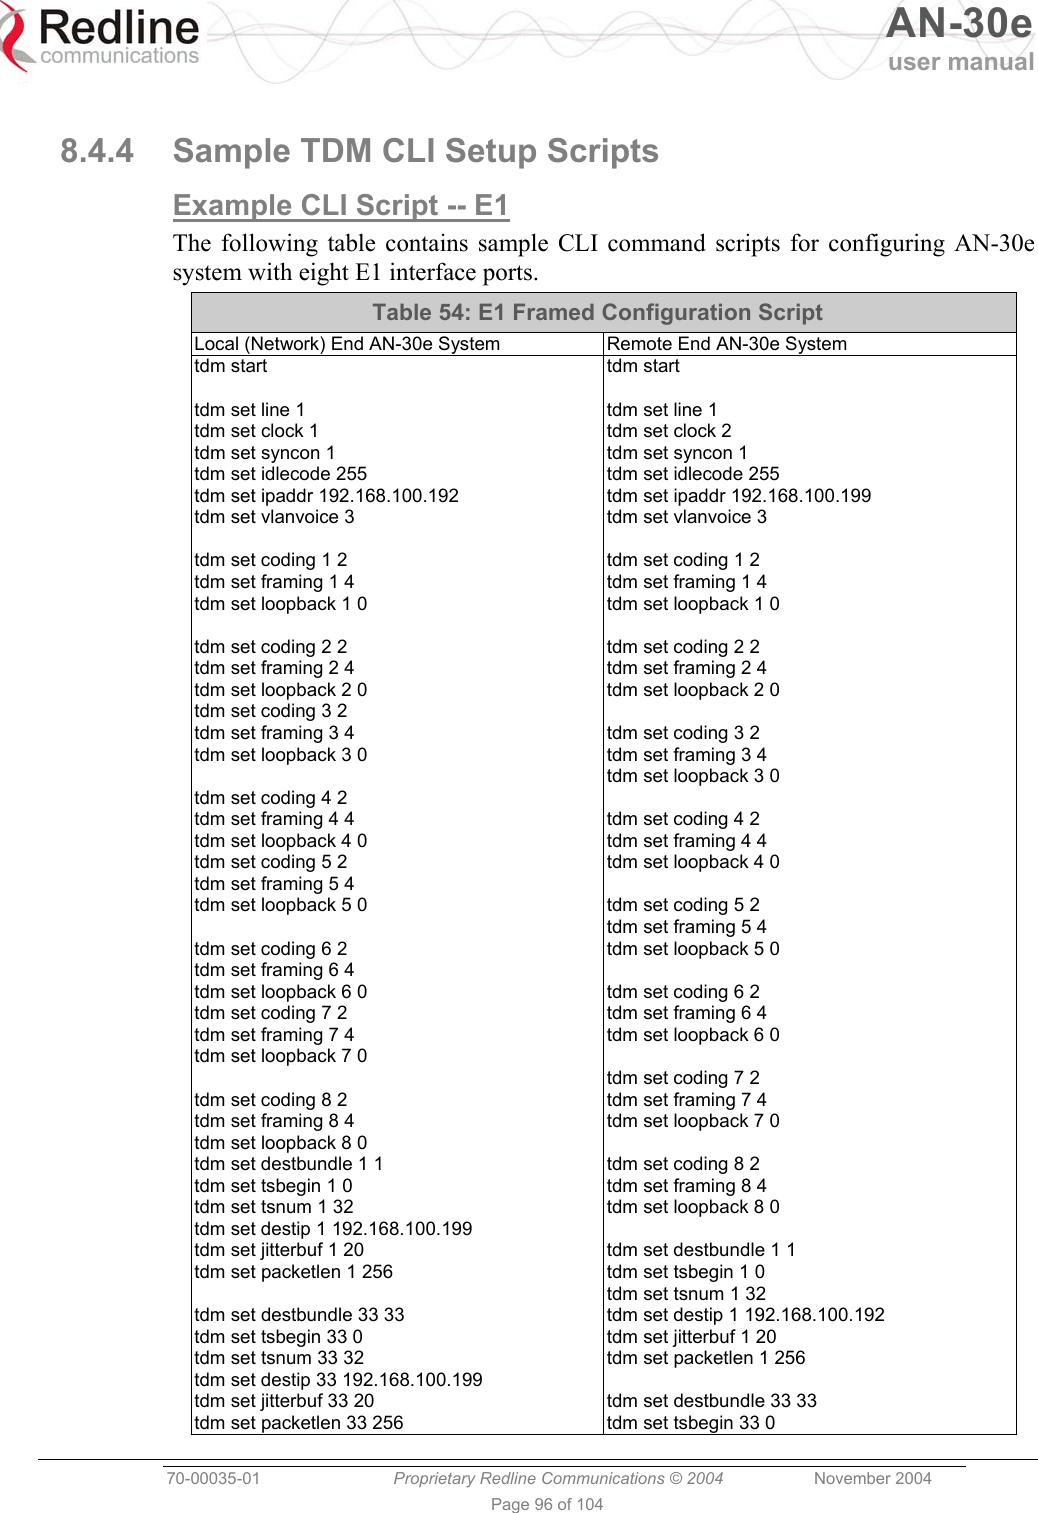   AN-30e user manual  70-00035-01  Proprietary Redline Communications © 2004 November 2004   Page 96 of 104  8.4.4  Sample TDM CLI Setup Scripts Example CLI Script -- E1 The following table contains sample CLI command scripts for configuring AN-30e system with eight E1 interface ports. Table 54: E1 Framed Configuration Script Local (Network) End AN-30e System  Remote End AN-30e System tdm start   tdm set line 1 tdm set clock 1 tdm set syncon 1 tdm set idlecode 255 tdm set ipaddr 192.168.100.192 tdm set vlanvoice 3   tdm set coding 1 2 tdm set framing 1 4 tdm set loopback 1 0   tdm set coding 2 2 tdm set framing 2 4 tdm set loopback 2 0 tdm set coding 3 2 tdm set framing 3 4 tdm set loopback 3 0   tdm set coding 4 2 tdm set framing 4 4 tdm set loopback 4 0 tdm set coding 5 2 tdm set framing 5 4 tdm set loopback 5 0   tdm set coding 6 2 tdm set framing 6 4 tdm set loopback 6 0 tdm set coding 7 2 tdm set framing 7 4 tdm set loopback 7 0   tdm set coding 8 2 tdm set framing 8 4 tdm set loopback 8 0 tdm set destbundle 1 1 tdm set tsbegin 1 0 tdm set tsnum 1 32 tdm set destip 1 192.168.100.199 tdm set jitterbuf 1 20 tdm set packetlen 1 256   tdm set destbundle 33 33 tdm set tsbegin 33 0 tdm set tsnum 33 32 tdm set destip 33 192.168.100.199 tdm set jitterbuf 33 20 tdm set packetlen 33 256 tdm start   tdm set line 1 tdm set clock 2 tdm set syncon 1 tdm set idlecode 255 tdm set ipaddr 192.168.100.199 tdm set vlanvoice 3   tdm set coding 1 2 tdm set framing 1 4 tdm set loopback 1 0   tdm set coding 2 2 tdm set framing 2 4 tdm set loopback 2 0   tdm set coding 3 2 tdm set framing 3 4 tdm set loopback 3 0   tdm set coding 4 2 tdm set framing 4 4 tdm set loopback 4 0   tdm set coding 5 2 tdm set framing 5 4 tdm set loopback 5 0   tdm set coding 6 2 tdm set framing 6 4 tdm set loopback 6 0   tdm set coding 7 2 tdm set framing 7 4 tdm set loopback 7 0   tdm set coding 8 2 tdm set framing 8 4 tdm set loopback 8 0   tdm set destbundle 1 1 tdm set tsbegin 1 0 tdm set tsnum 1 32 tdm set destip 1 192.168.100.192 tdm set jitterbuf 1 20 tdm set packetlen 1 256   tdm set destbundle 33 33 tdm set tsbegin 33 0 